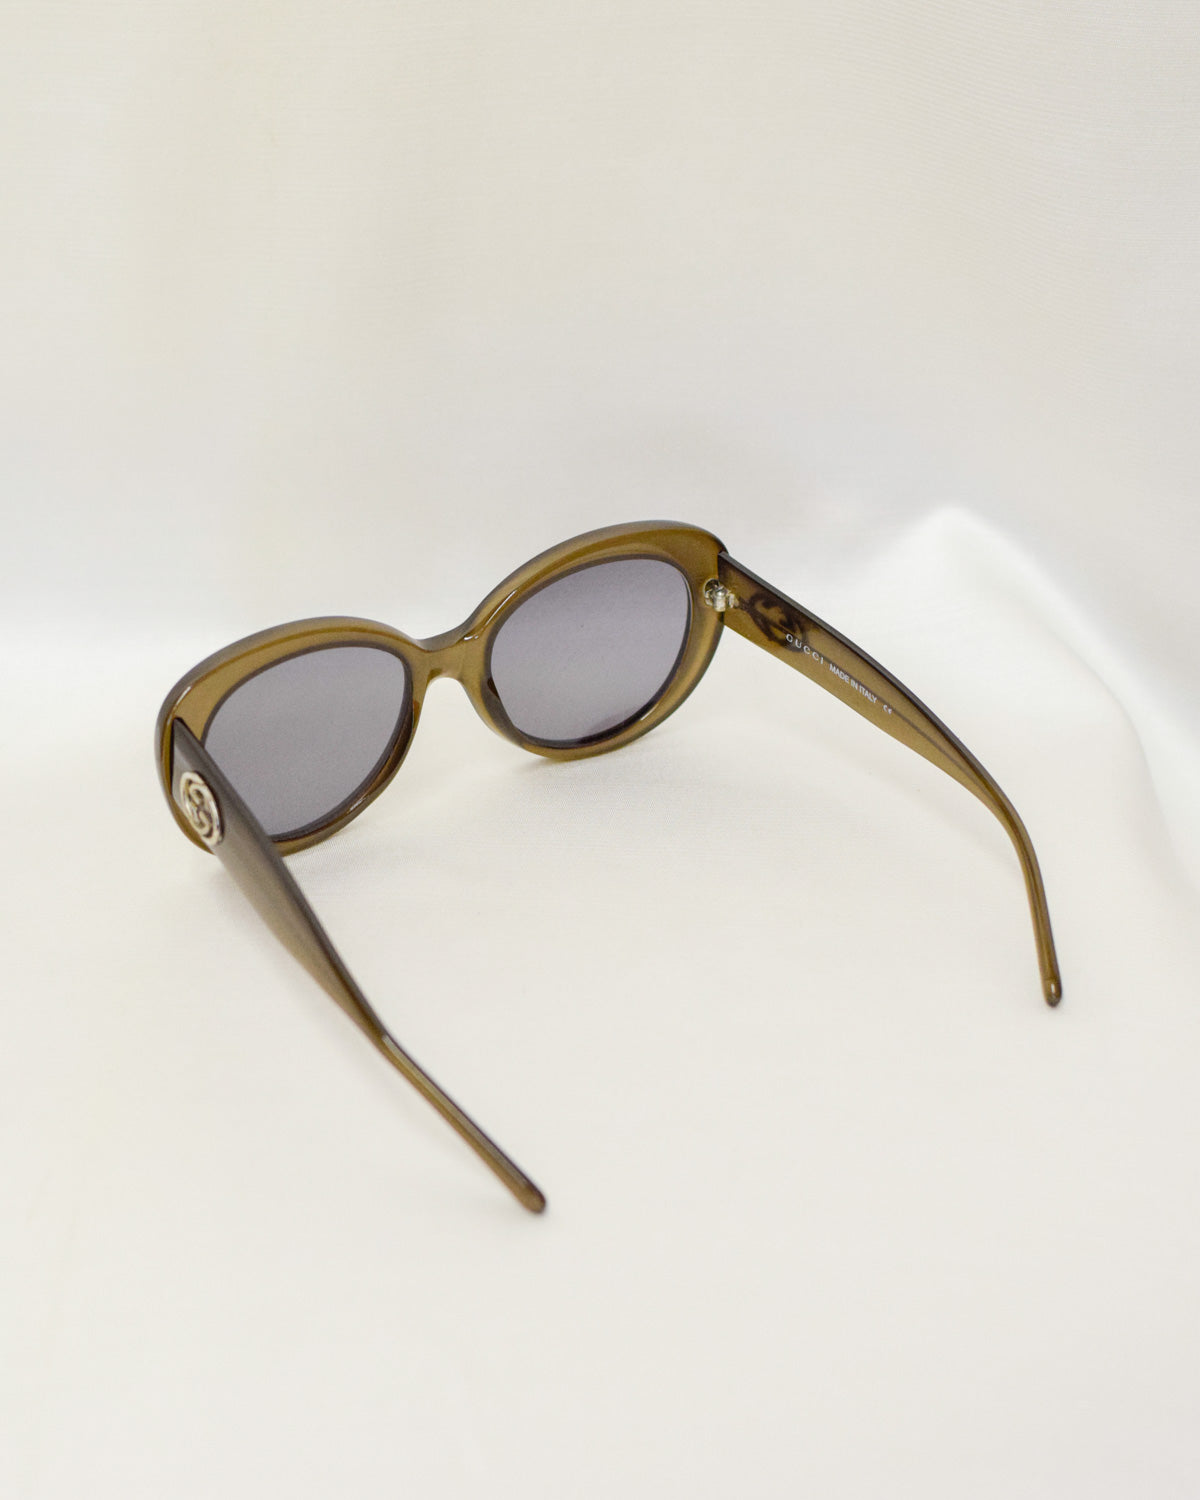 Gucci Vintage Olive Green Sunglasses 90's - with box